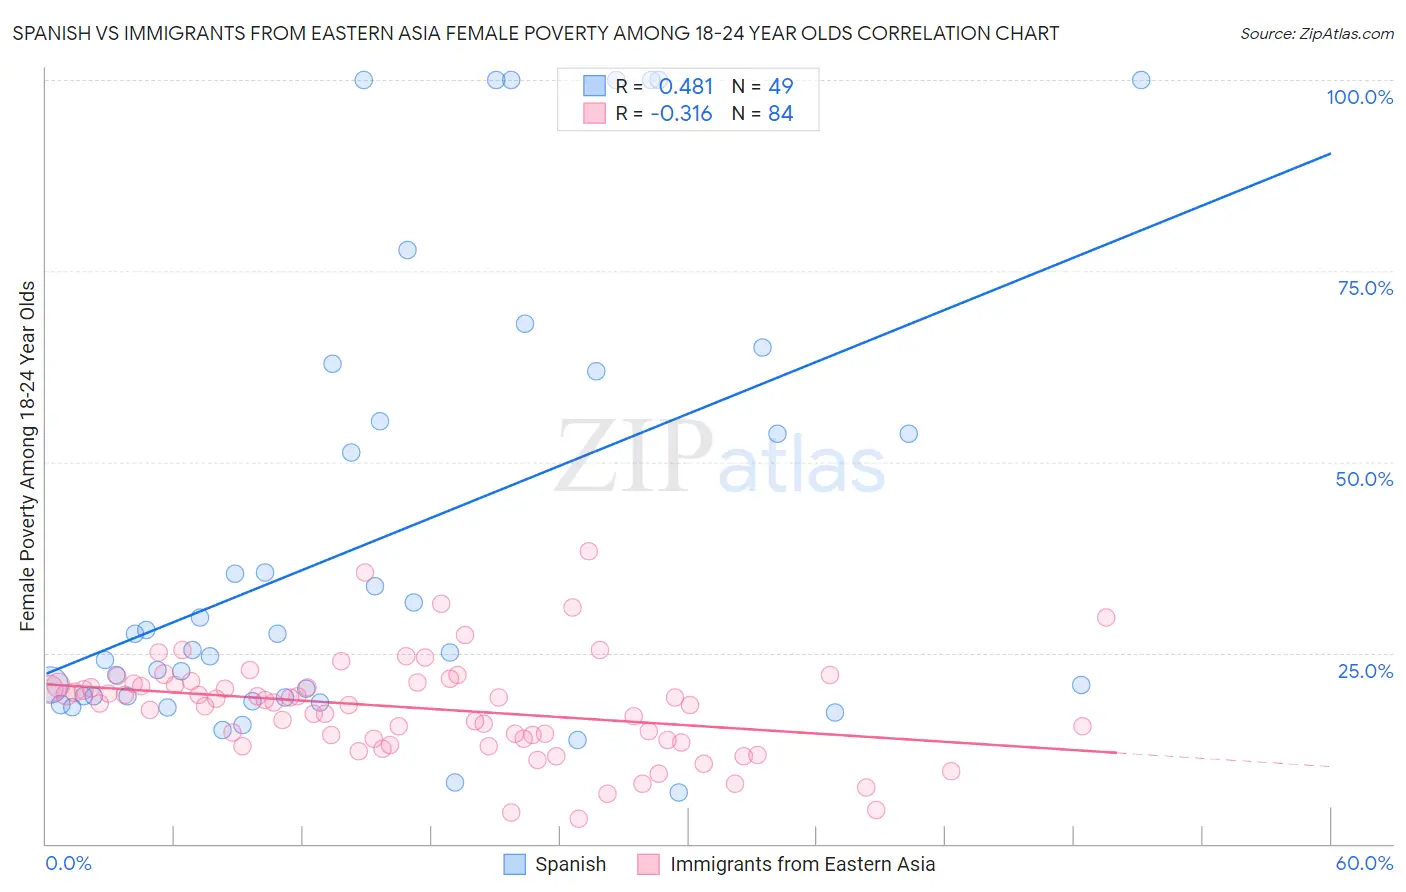 Spanish vs Immigrants from Eastern Asia Female Poverty Among 18-24 Year Olds